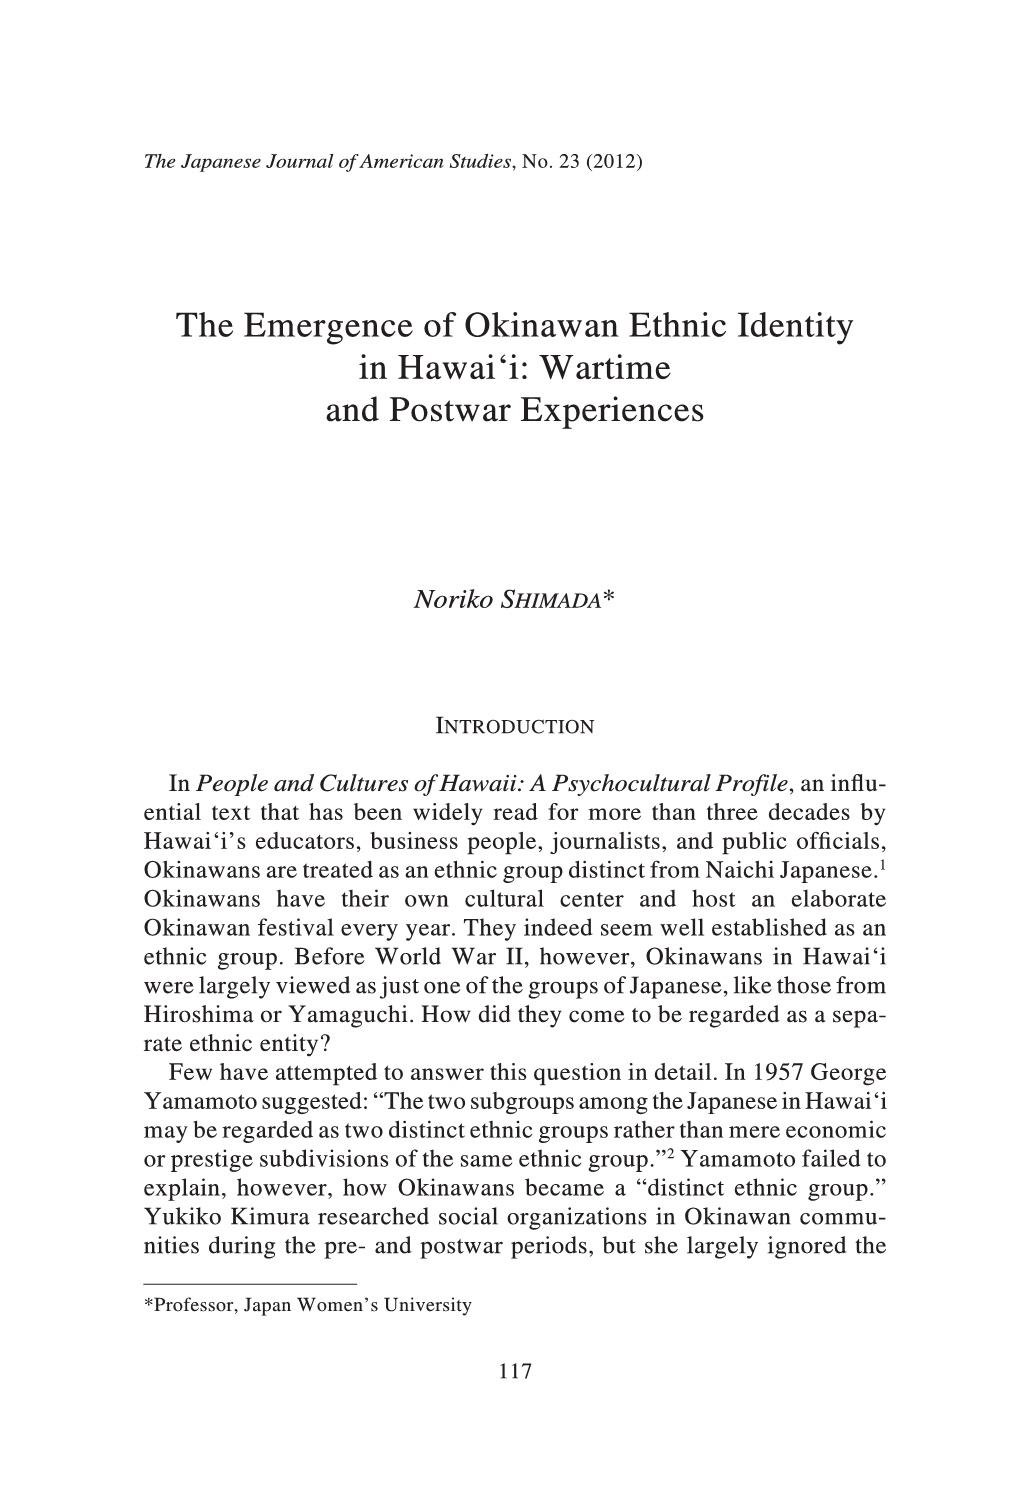 The Emergence of Okinawan Ethnic Identity in Hawai'i: Wartime And